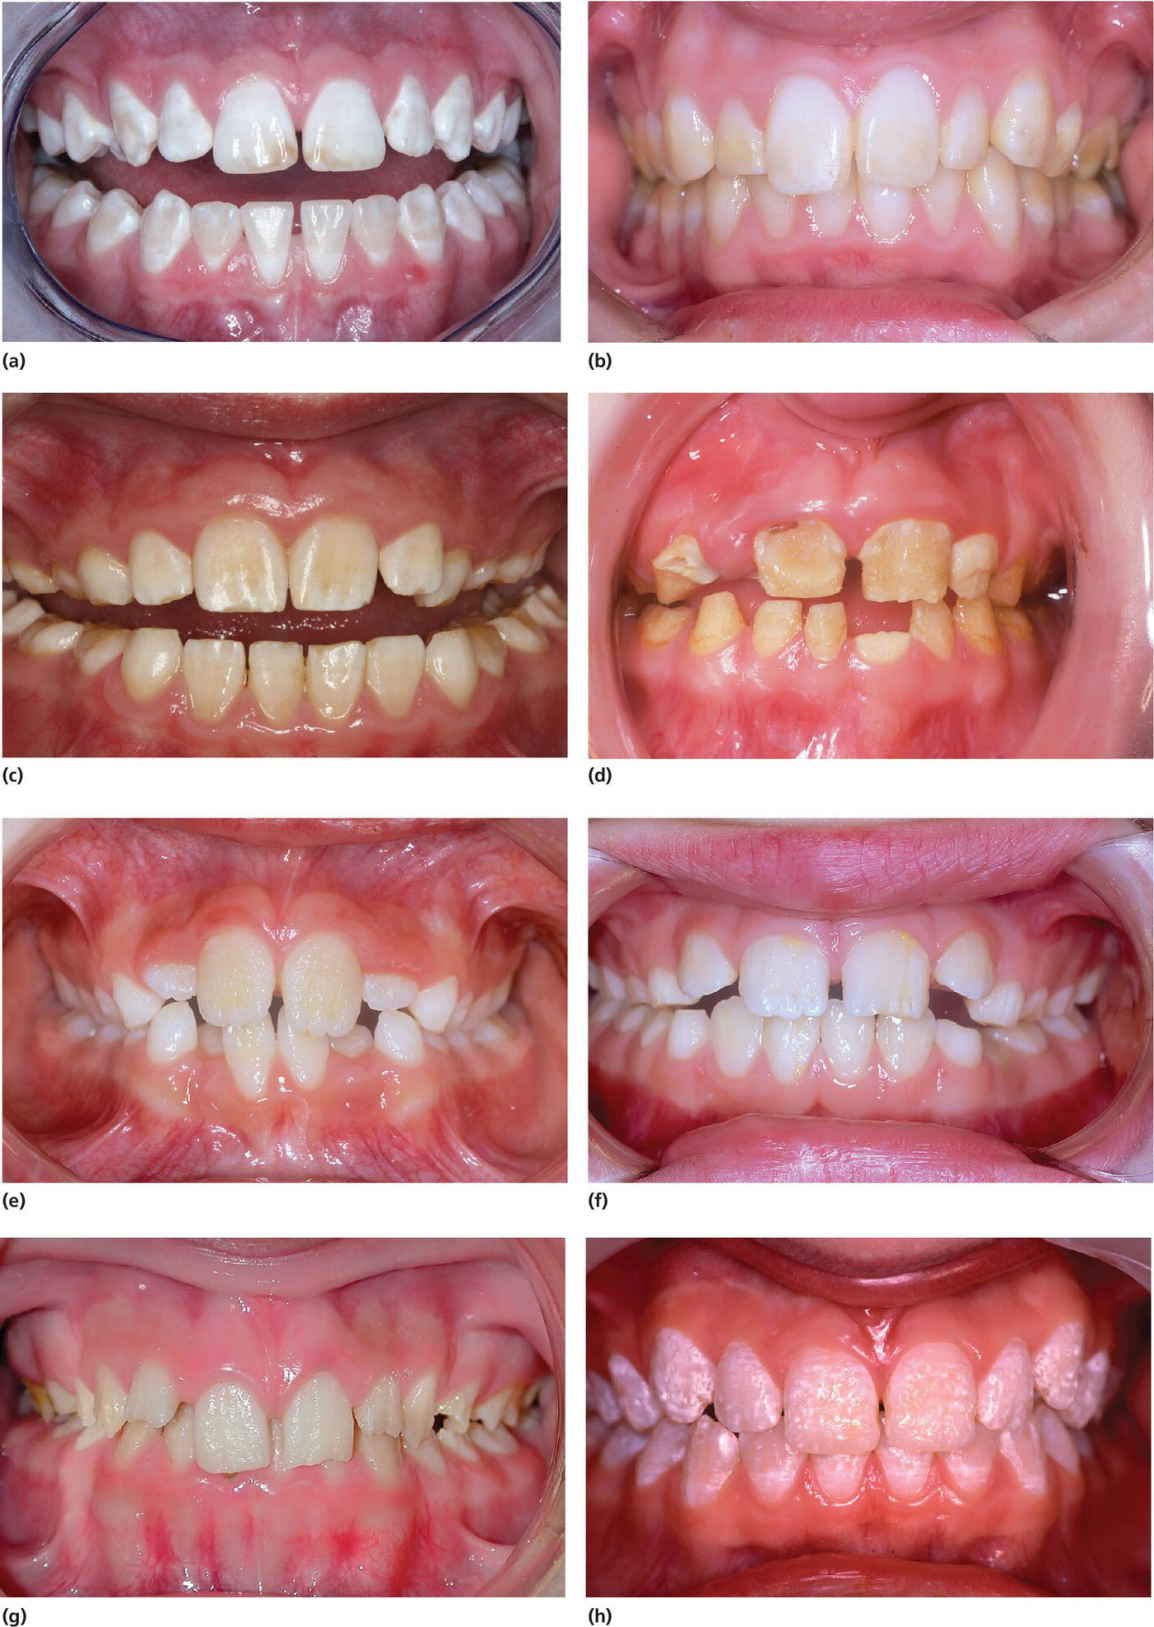 8 Photos displaying dentition with amelogenesis imperfecta, and varying types of hypomaturation, hypocalcification of enamel, hypoplasticity, and a combination of hypomaturation and hypoplastic type.